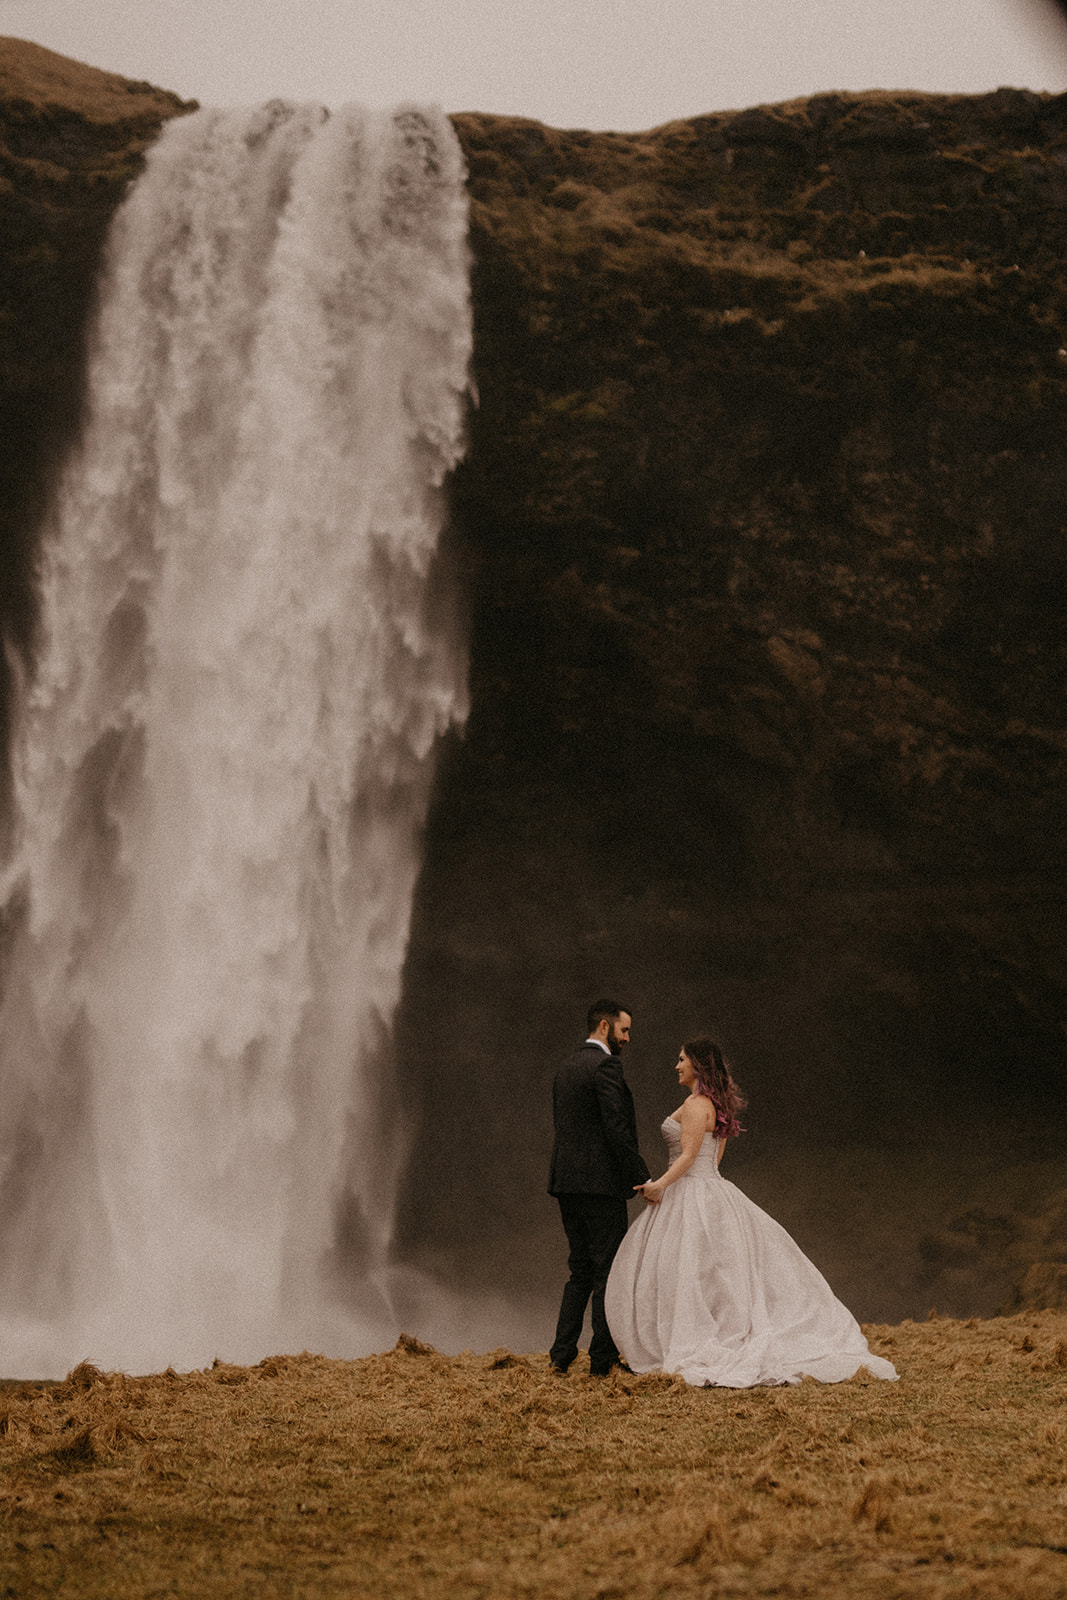 Elopement in Iceland: Love story at a waterfall. Experience the enchantment. #Elopement #Iceland #Waterfall #LoveStory